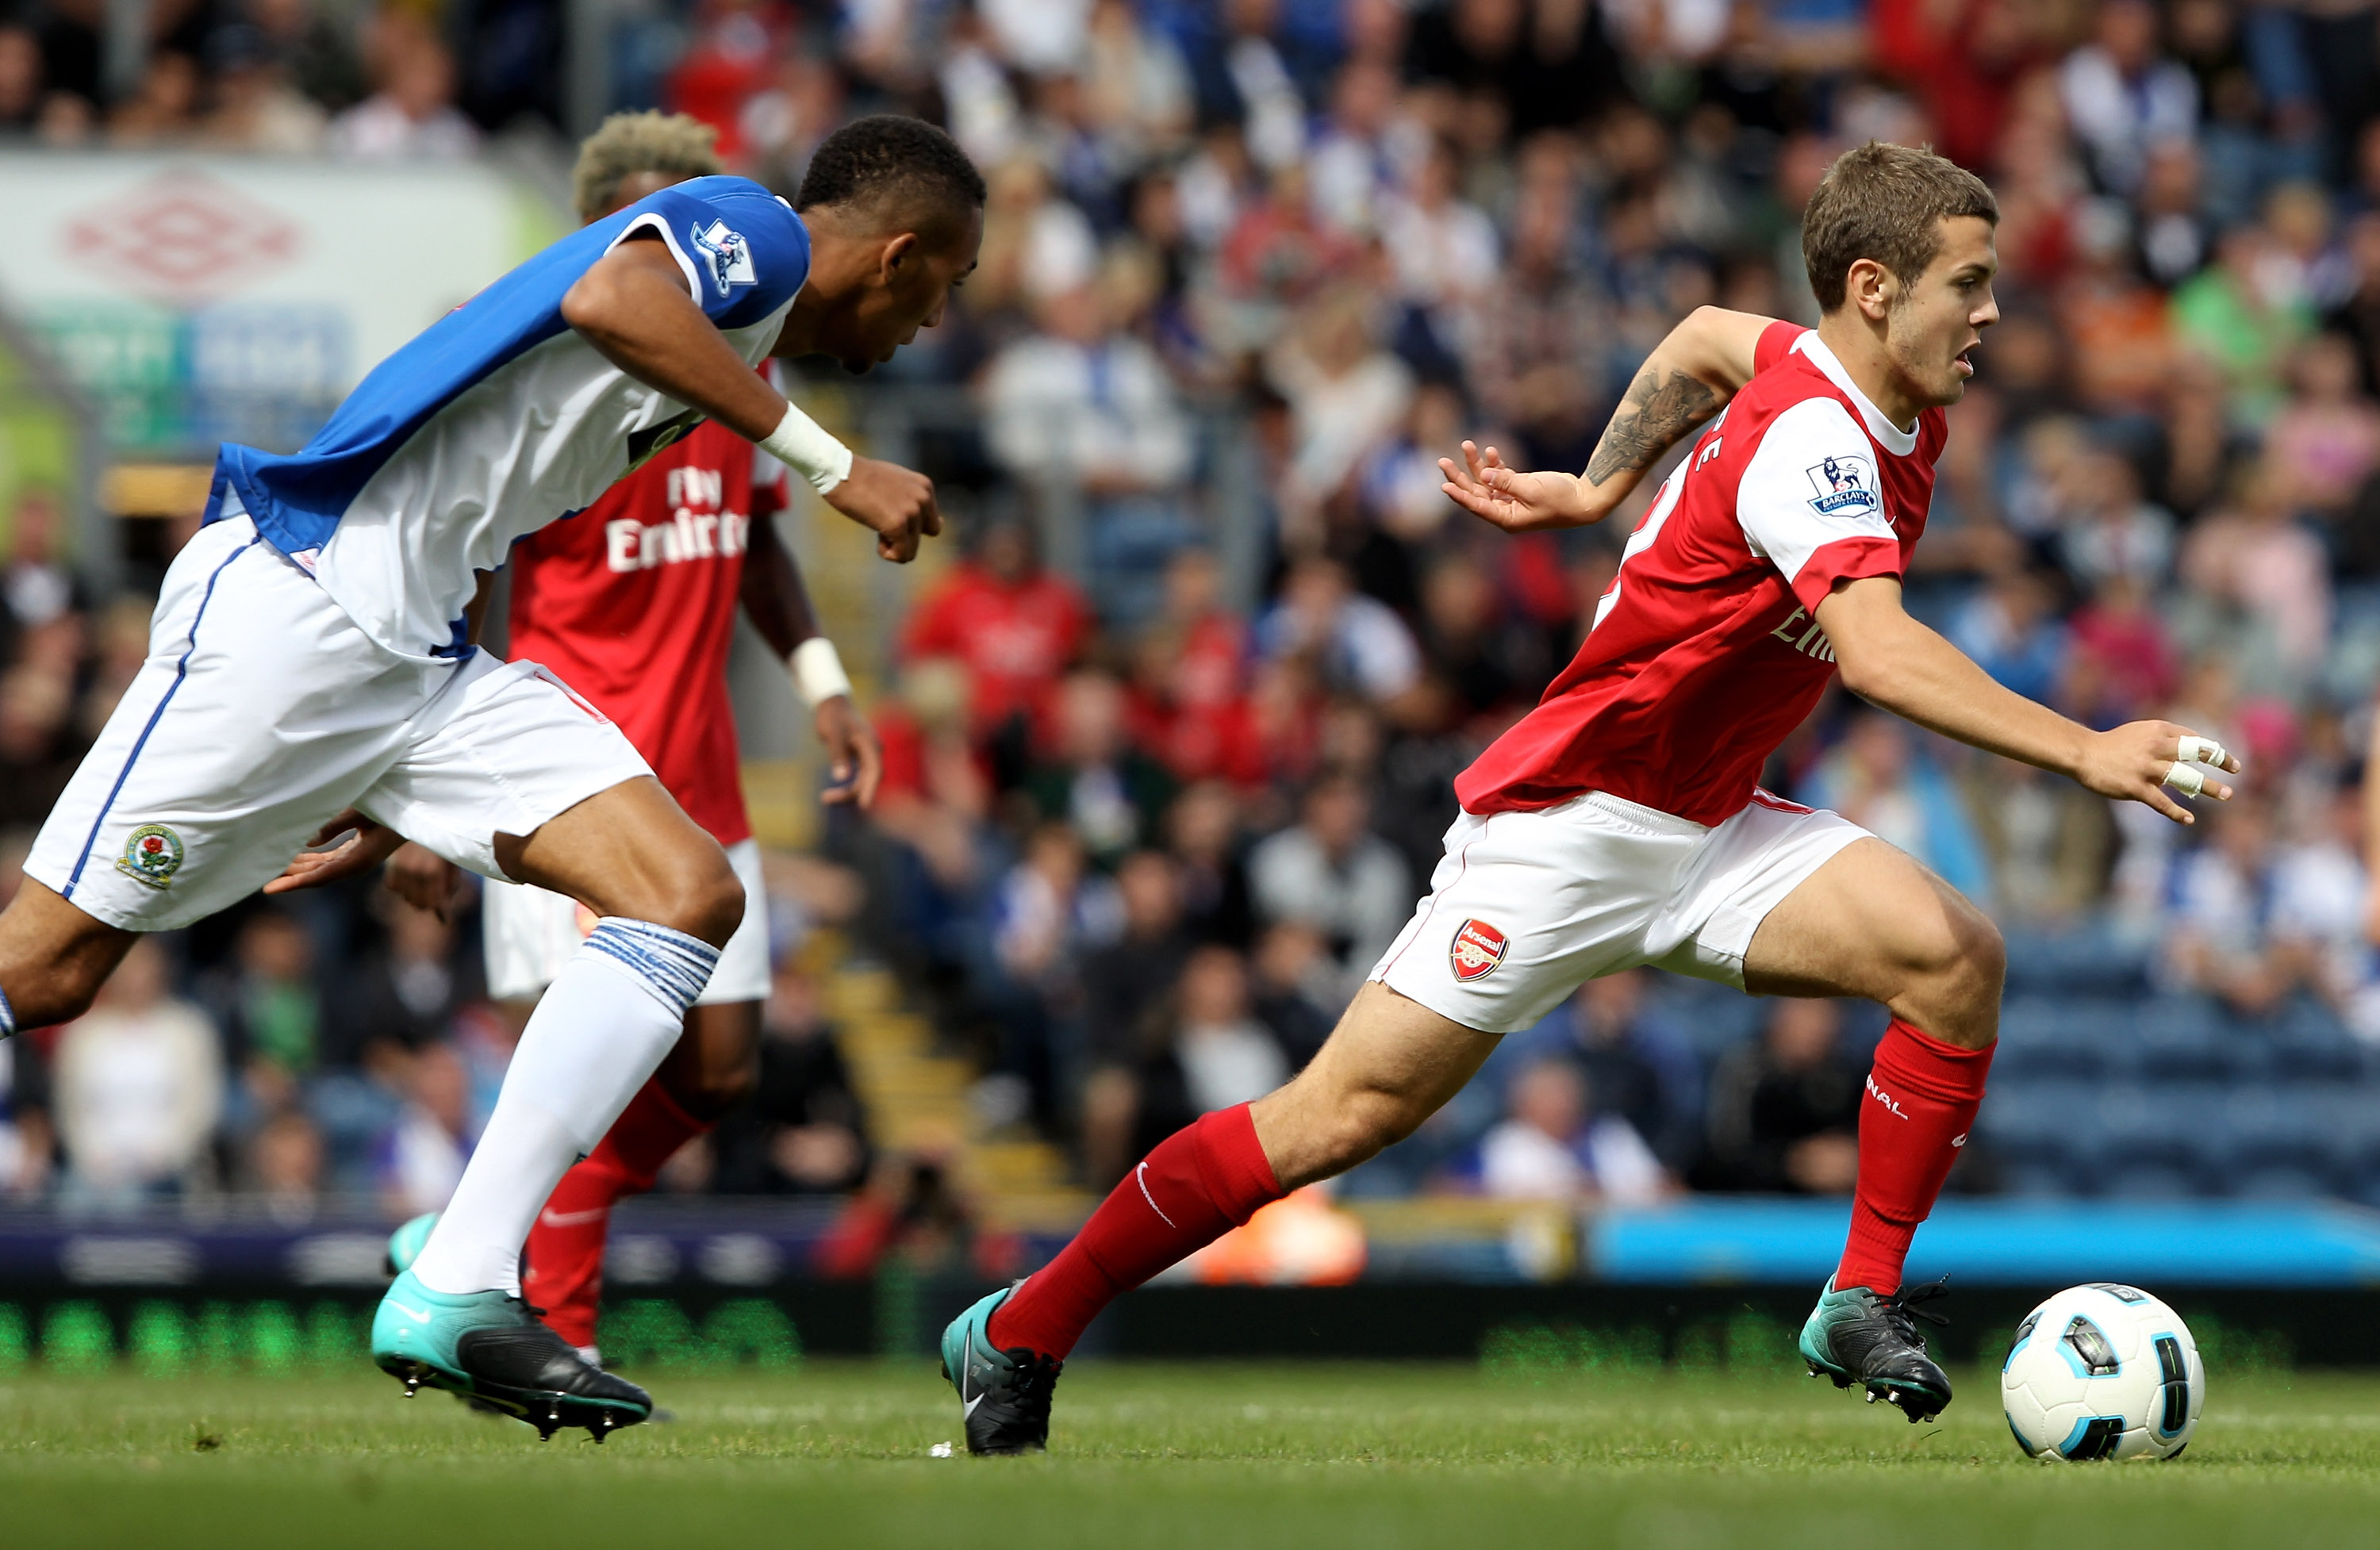 BLACKBURN, ENGLAND - AUGUST 28:  Jack Wilshere of Arsenal moves away from Steven Nzonzi of Blackburn Rovers during the Barclays Premier League match between Blackburn Rovers and Arsenal at Ewood Park on August 28, 2010 in Blackburn, England.  (Photo by Cl